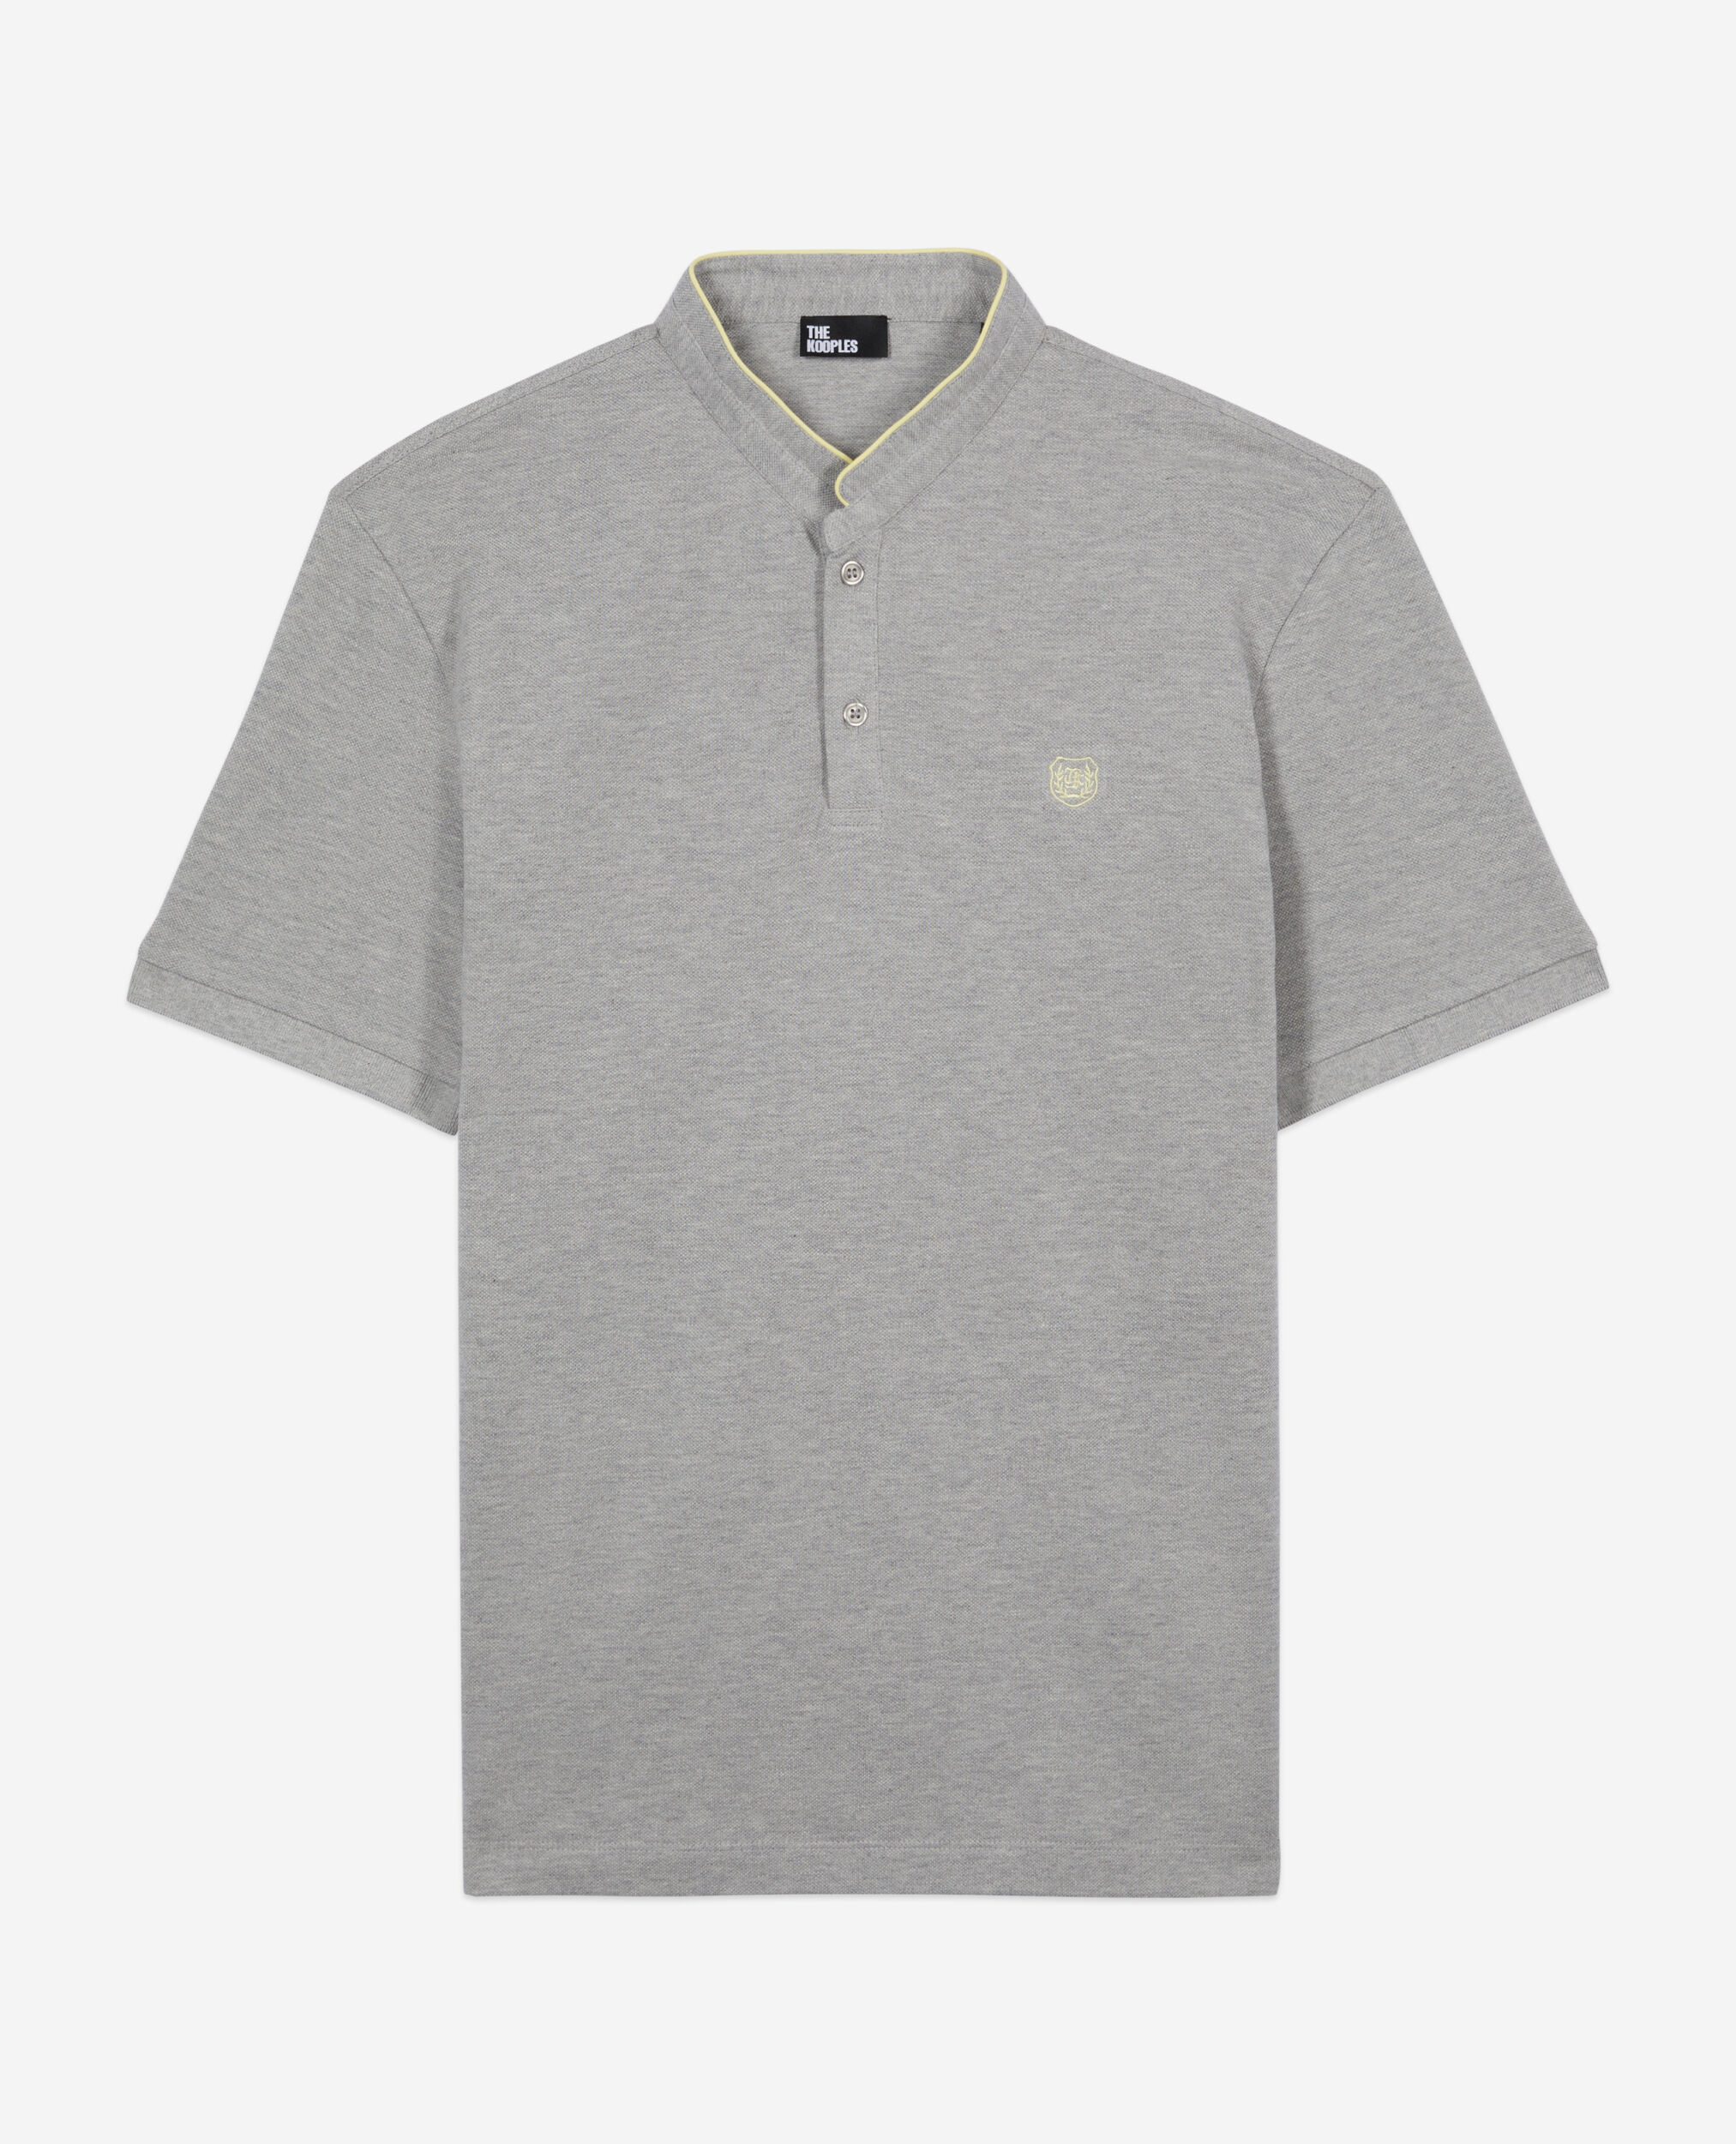 Grey pique cotton polo t-shirt, GREY YELLOW, hi-res image number null